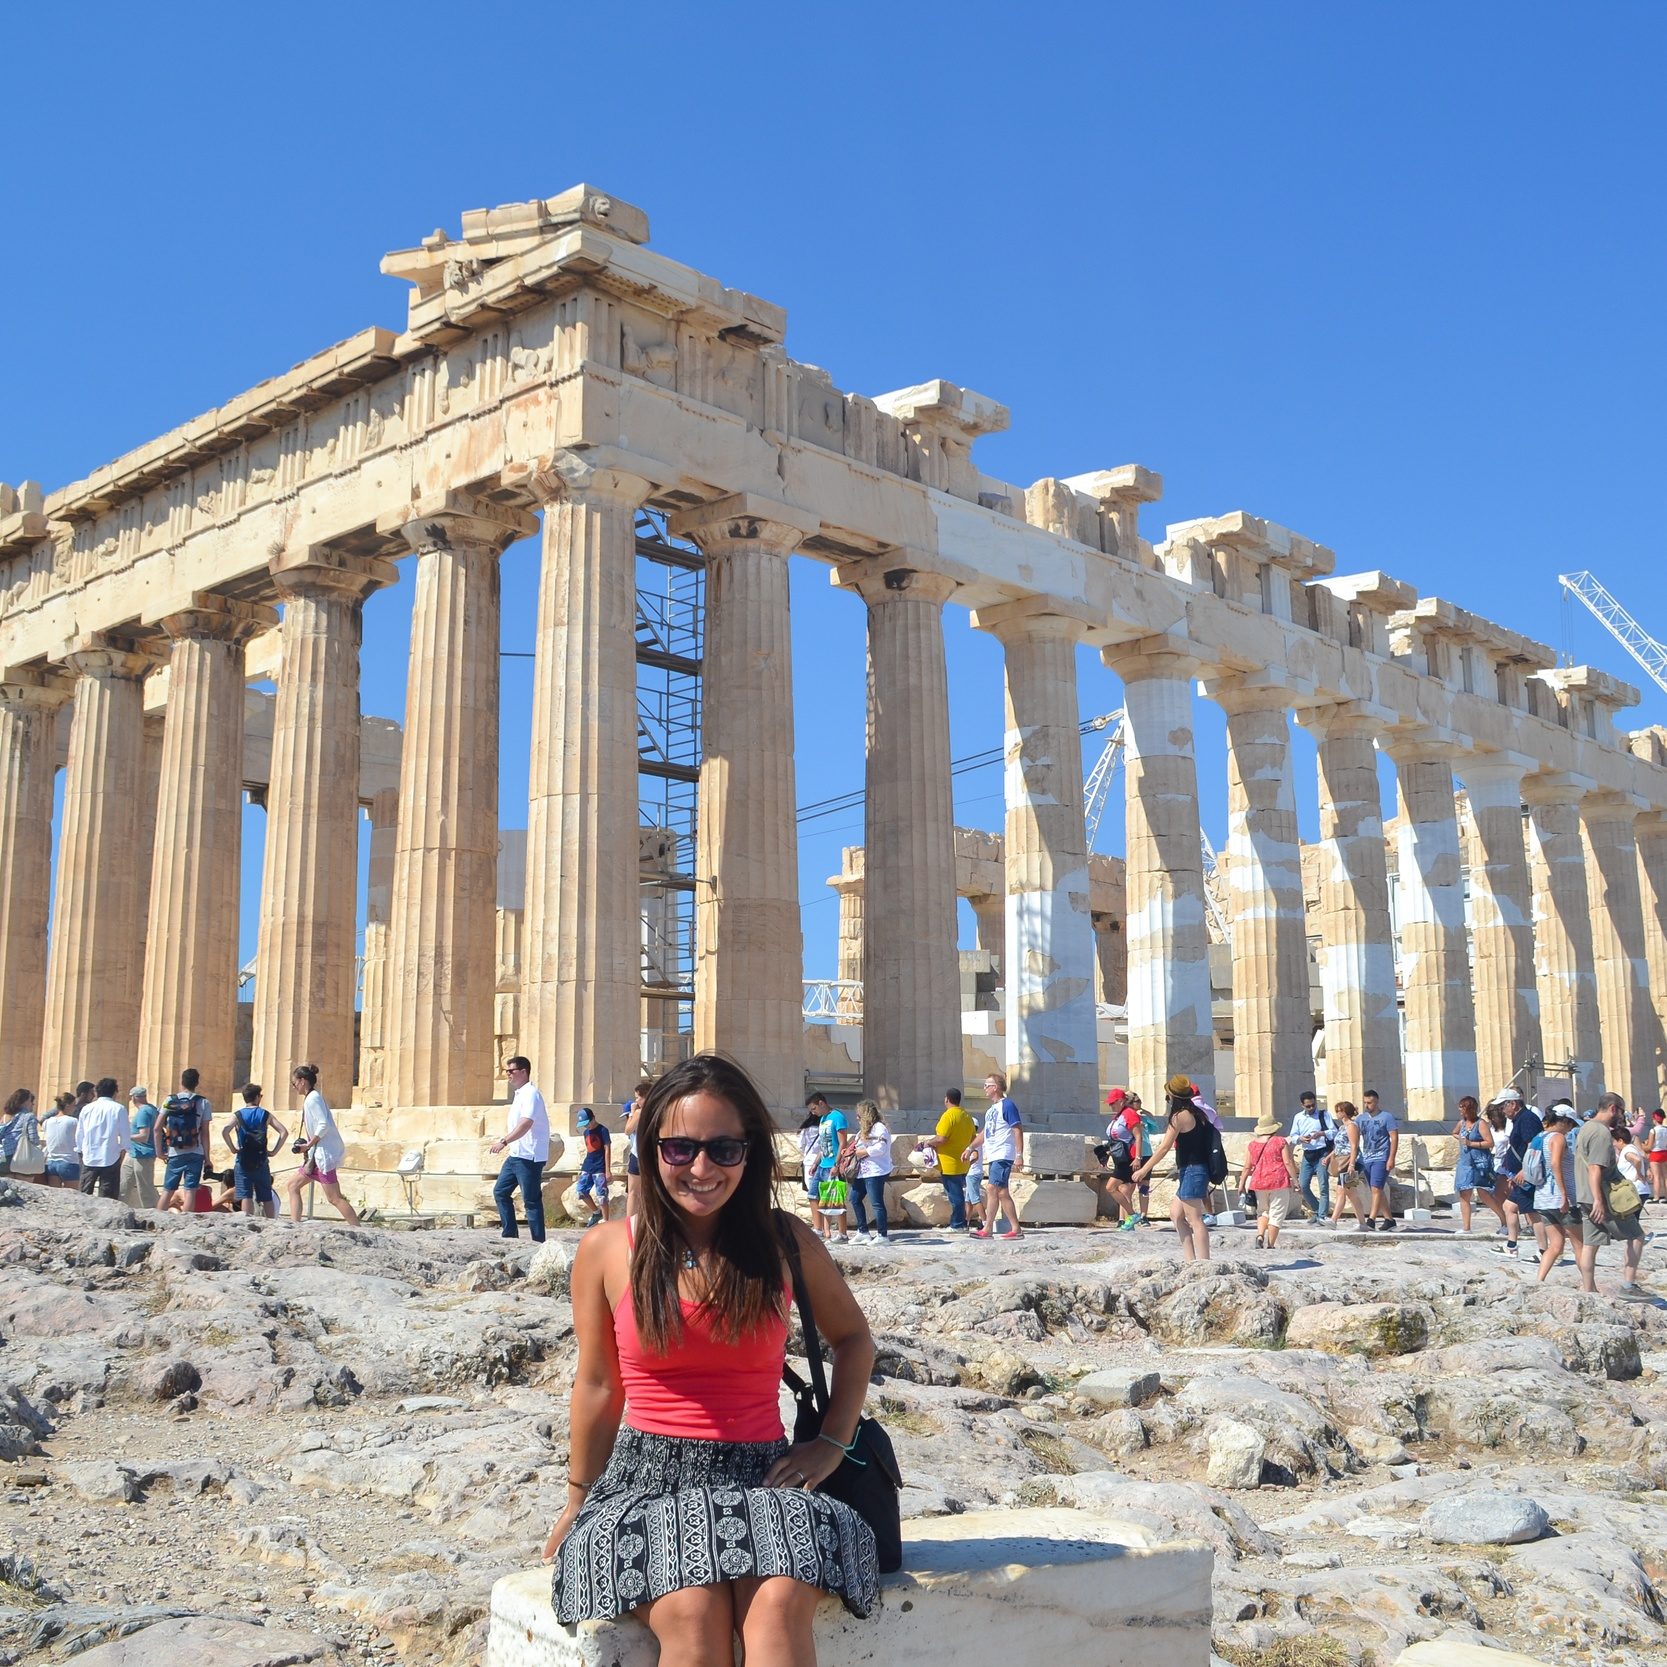 Planning a trip to the Mediterranean and looking for the best 10 day Greece itinerary?! You’re in luck, my Mediterranean-loving pal, I’ve got the perfect 10 days in Greece planned out for you below! AND if you want to extend your trip even further (aka see even more stunning islands), follow my advice for a complete 2 weeks in Greece!